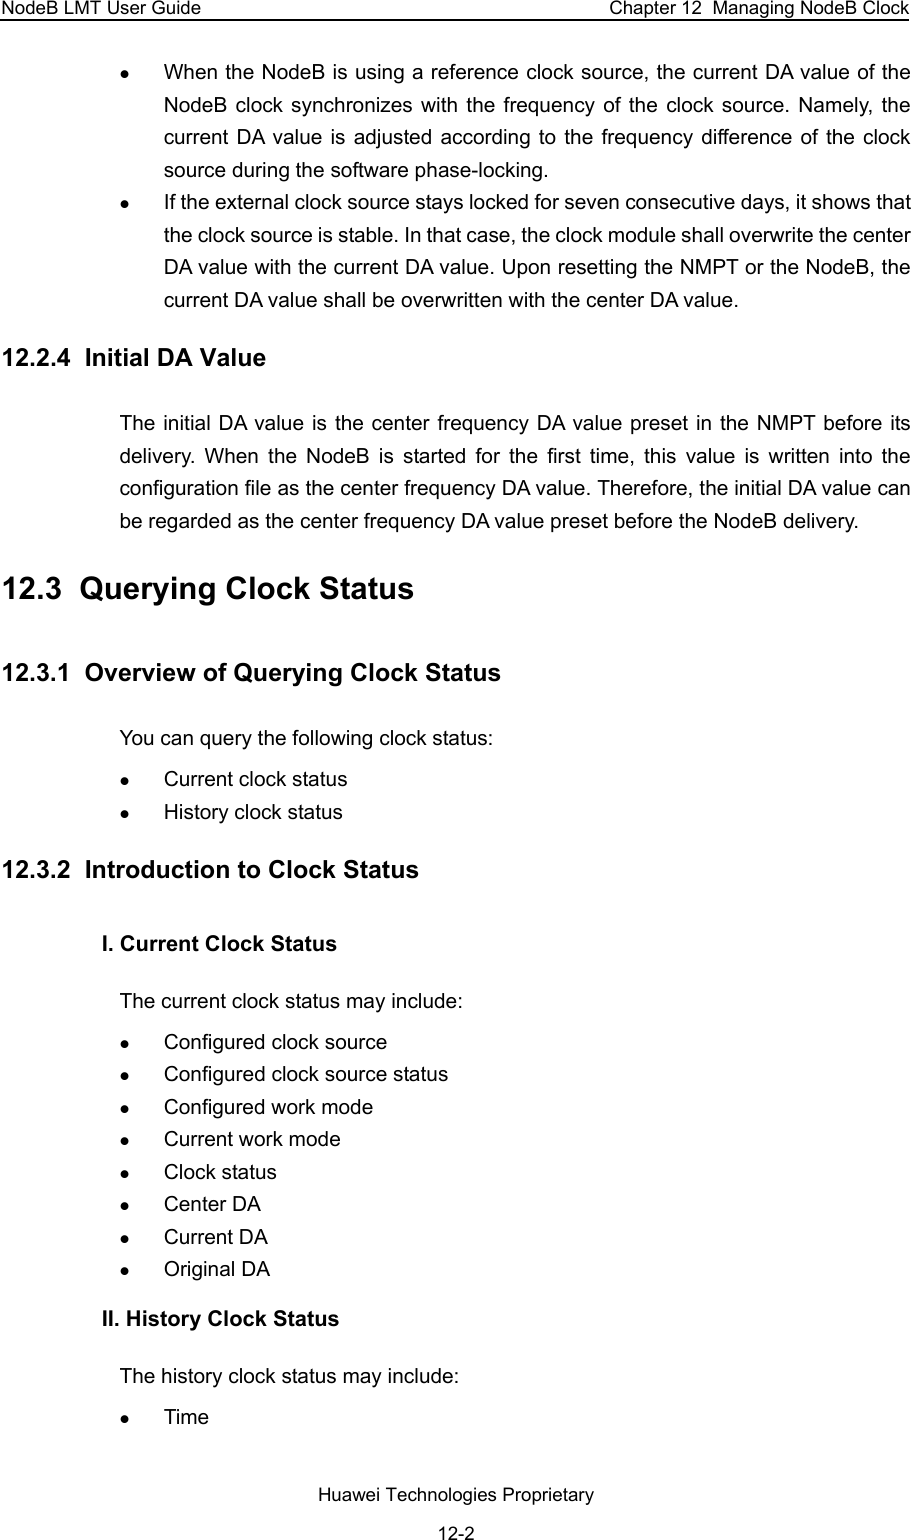 NodeB LMT User Guide  Chapter 12  Managing NodeB Clock z When the NodeB is using a reference clock source, the current DA value of the NodeB clock synchronizes with the frequency of the clock source. Namely, the current DA value is adjusted according to the frequency difference of the clock source during the software phase-locking.  z If the external clock source stays locked for seven consecutive days, it shows that the clock source is stable. In that case, the clock module shall overwrite the center DA value with the current DA value. Upon resetting the NMPT or the NodeB, the current DA value shall be overwritten with the center DA value.  12.2.4  Initial DA Value The initial DA value is the center frequency DA value preset in the NMPT before its delivery. When the NodeB is started for the first time, this value is written into the configuration file as the center frequency DA value. Therefore, the initial DA value can be regarded as the center frequency DA value preset before the NodeB delivery.  12.3  Querying Clock Status 12.3.1  Overview of Querying Clock Status You can query the following clock status: z Current clock status z History clock status  12.3.2  Introduction to Clock Status I. Current Clock Status The current clock status may include:  z Configured clock source z Configured clock source status z Configured work mode z Current work mode z Clock status z Center DA  z Current DA  z Original DA  II. History Clock Status The history clock status may include:  z Time Huawei Technologies Proprietary 12-2 